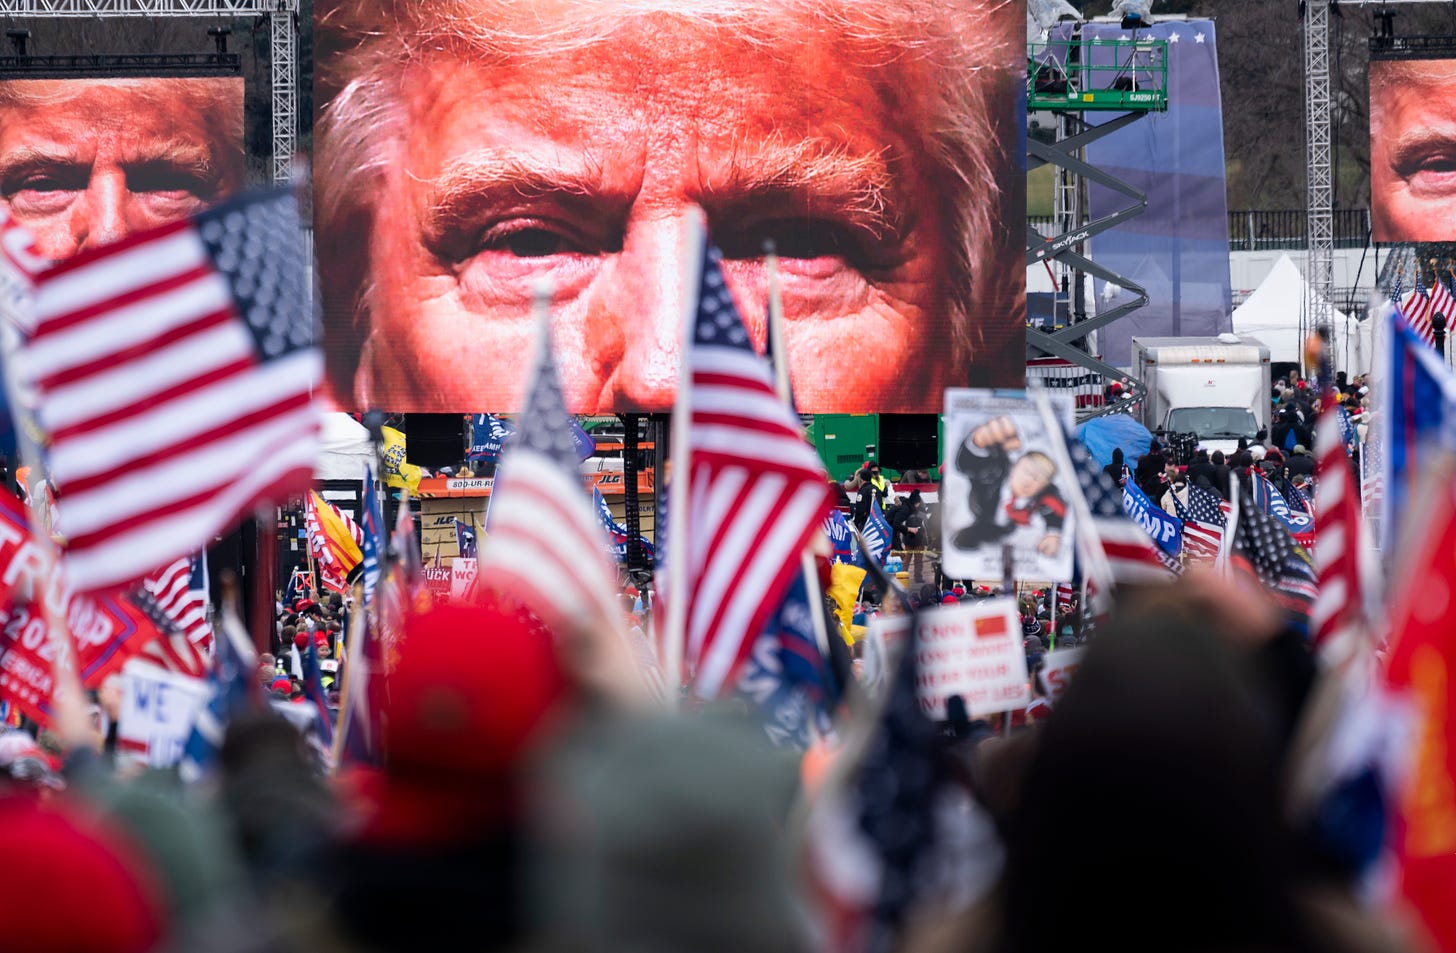 A photo of a large rally of people waving American flags and Trump signs, above the rally a large screen shows a closeup of the eyes of former president Donald Trump